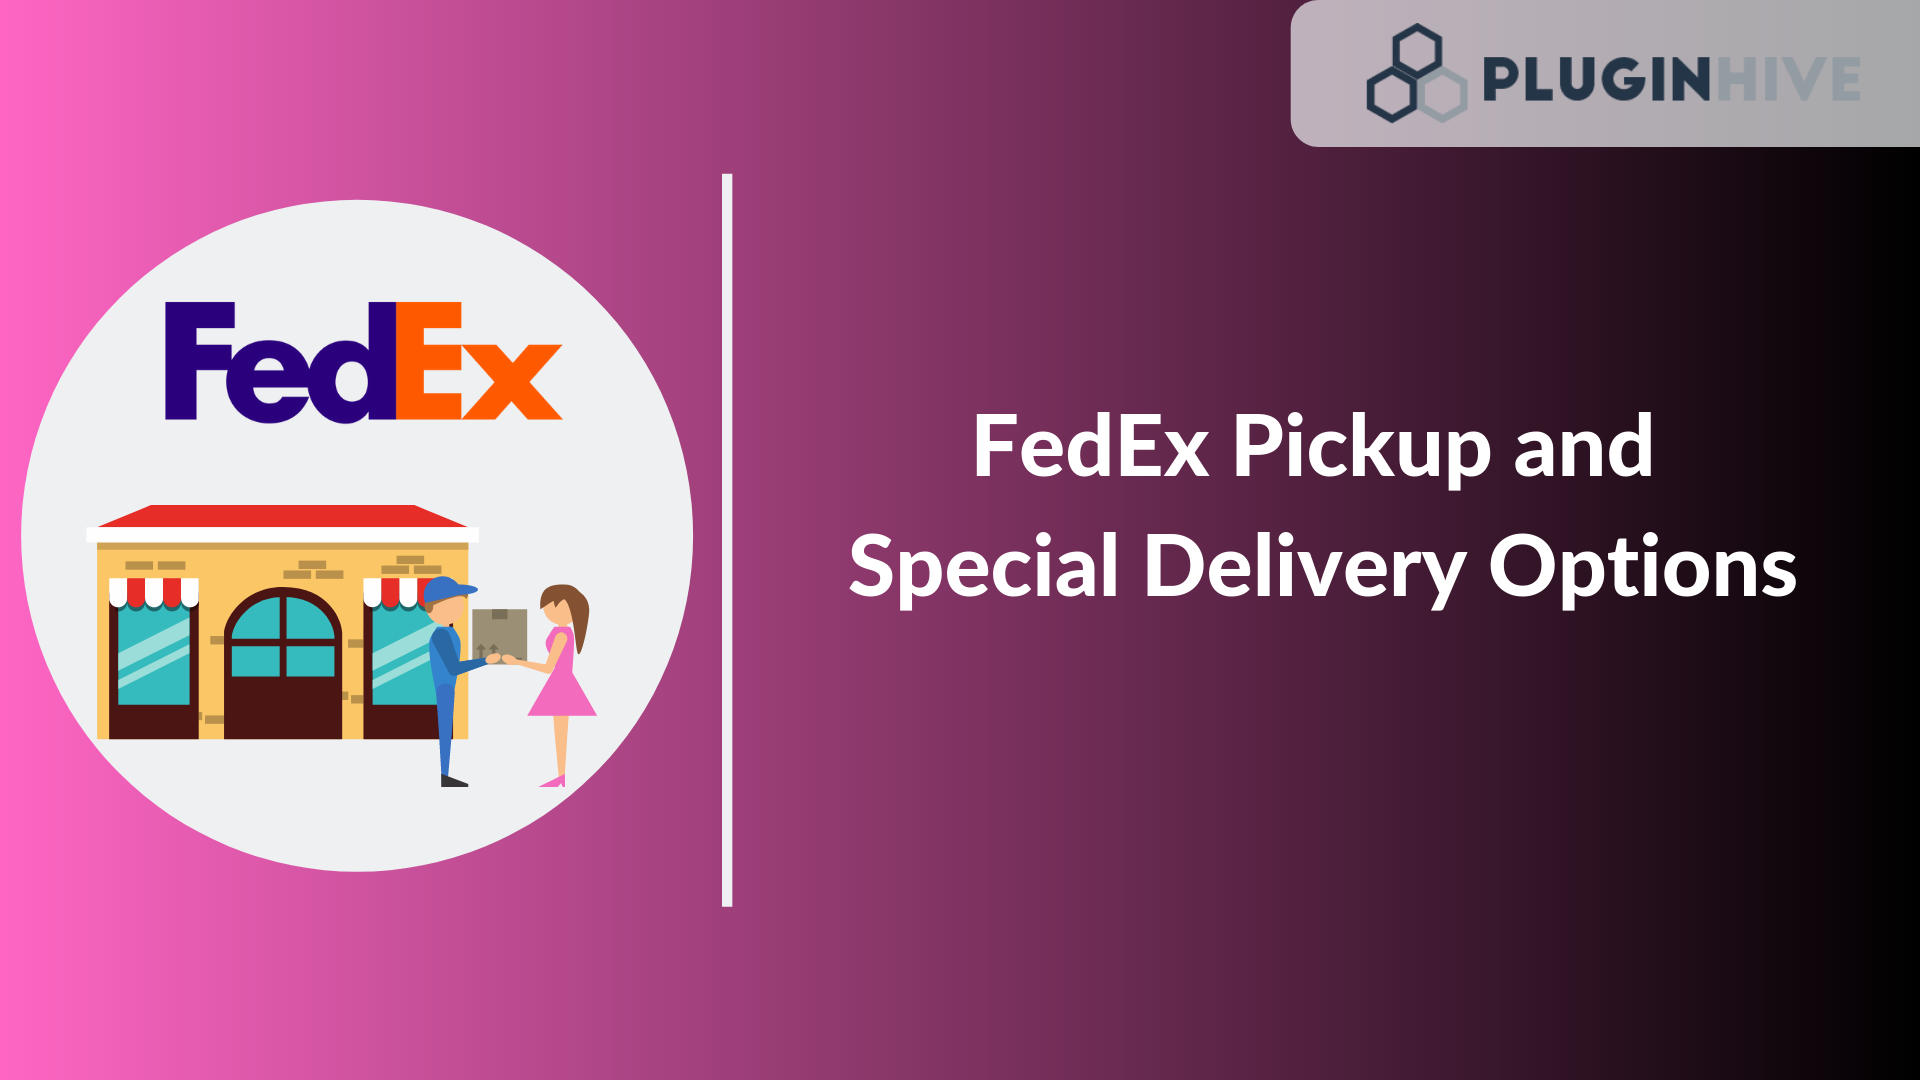 FedEx Pickup and Special Delivery Options for your